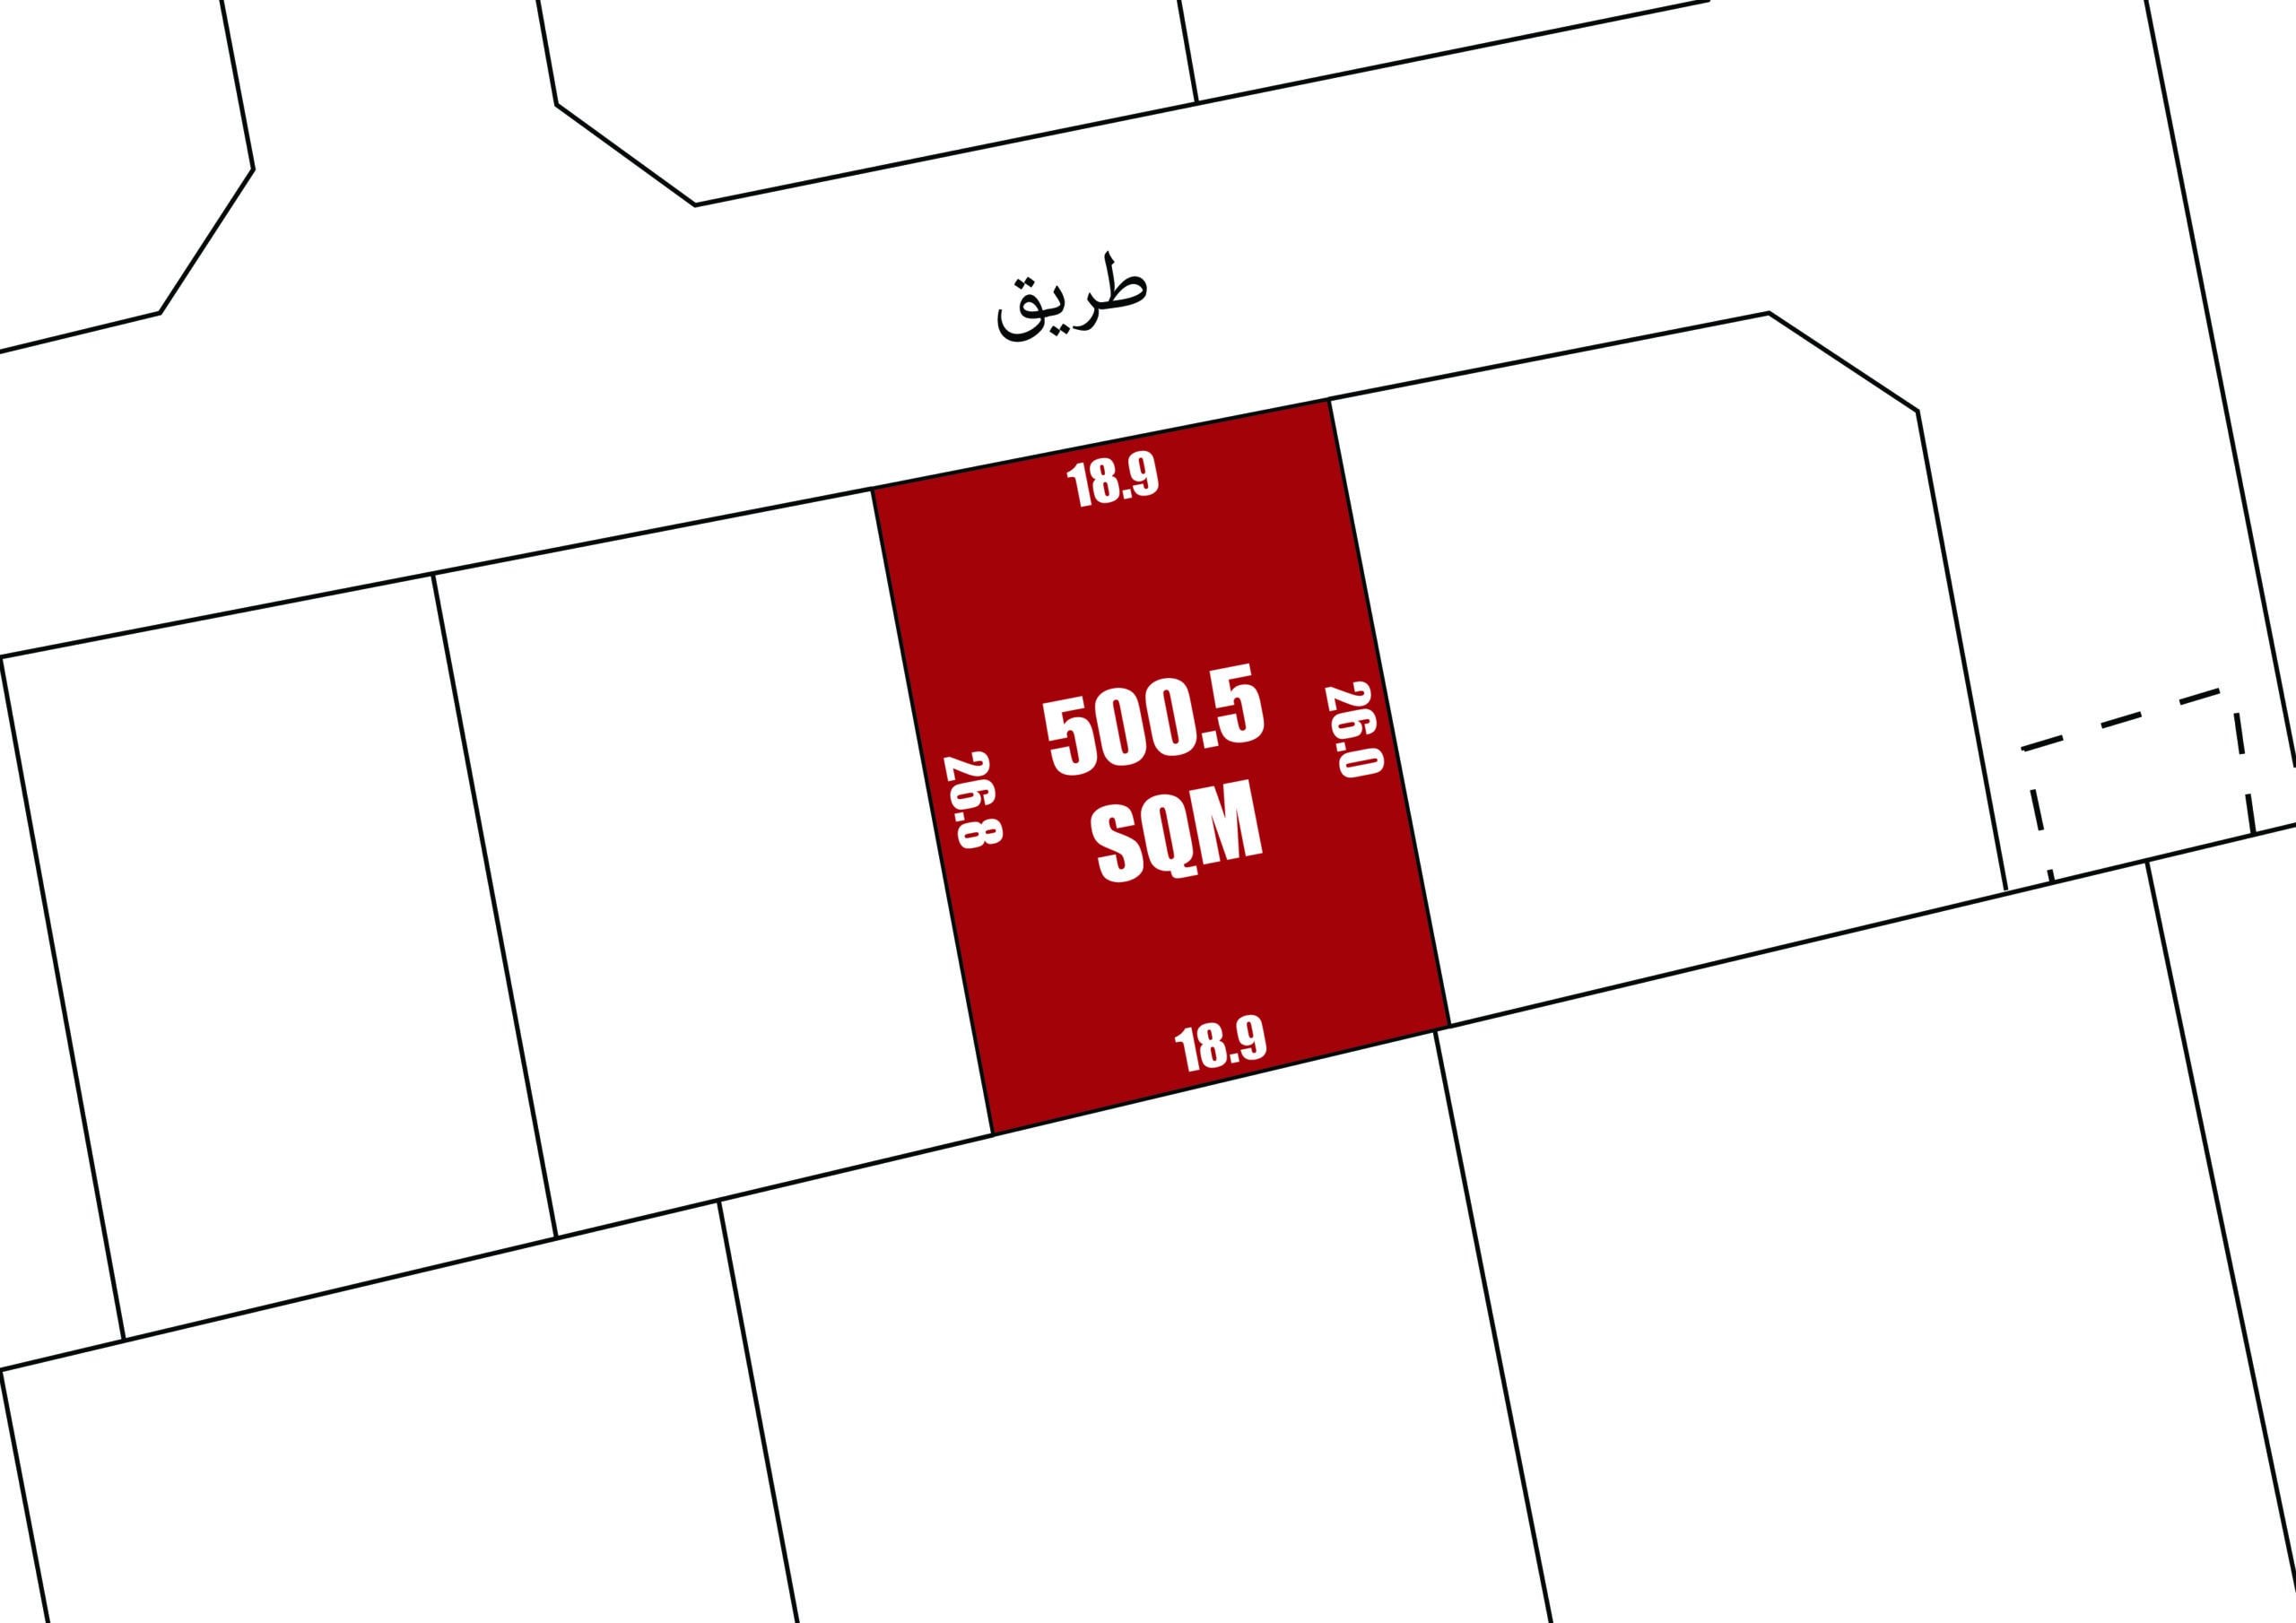 A diagram showing a red highlighted plot of land labeled "500.5 sqm Auto Draft" surrounded by other unlabeled plots, with dimensions provided on all sides.